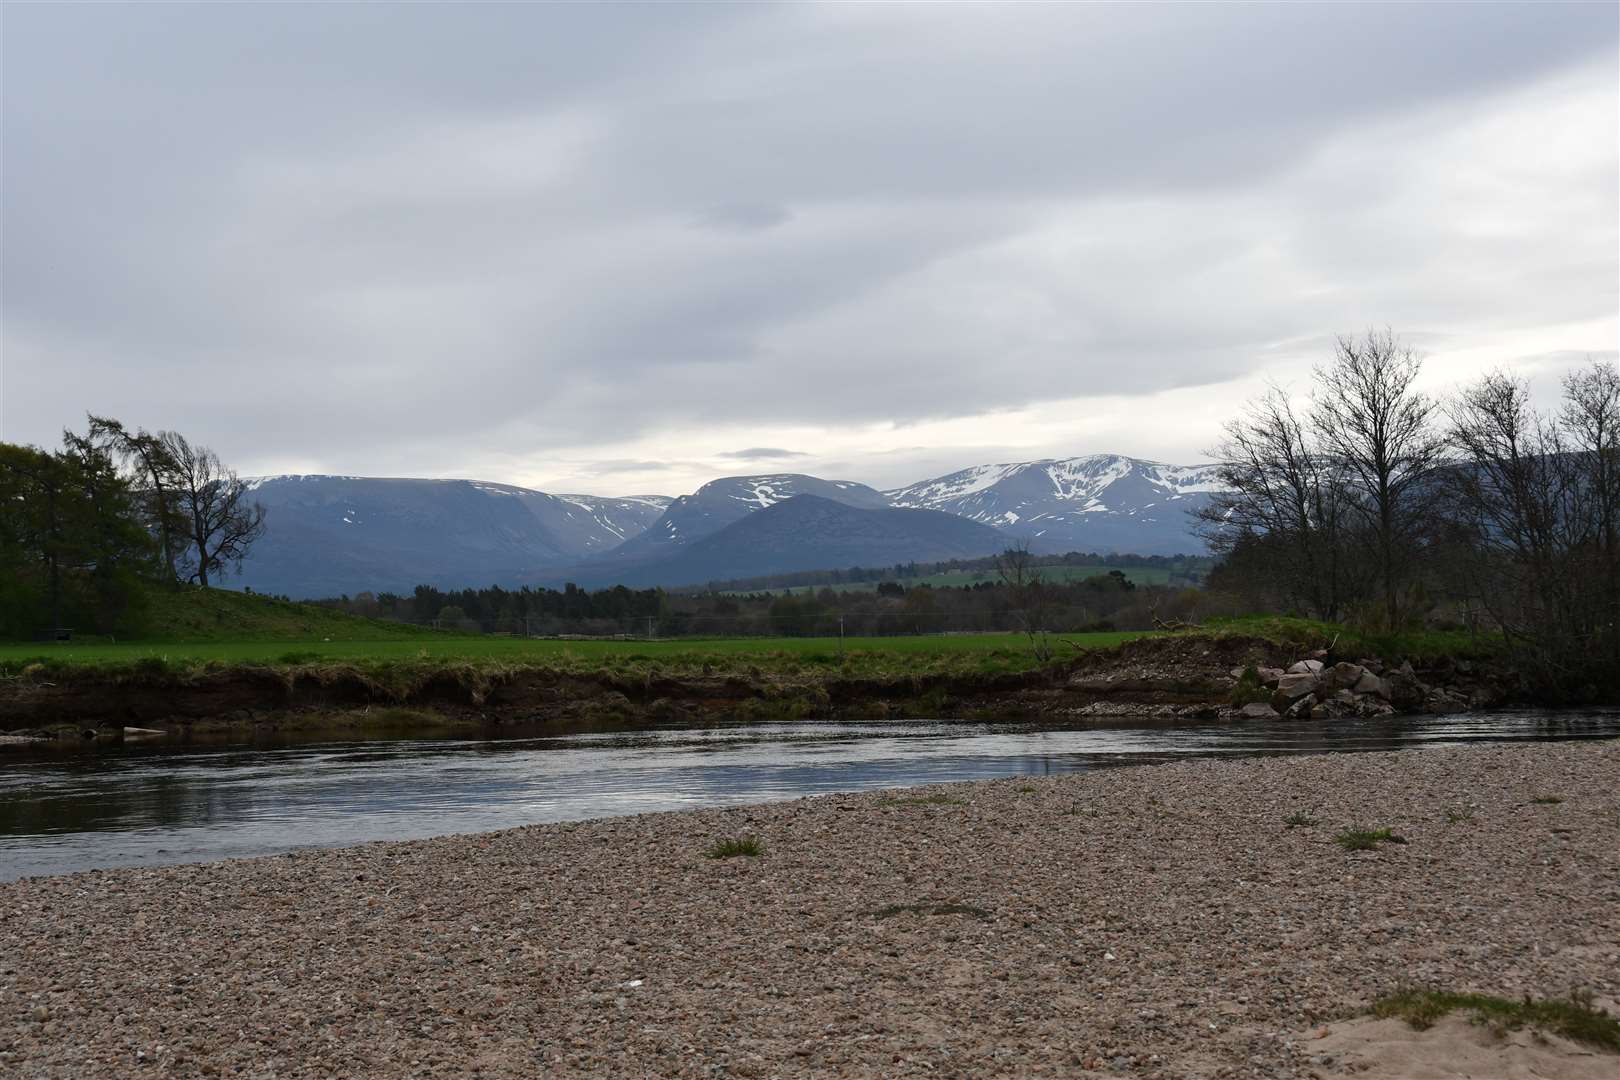 The River Spey by Aviemore.